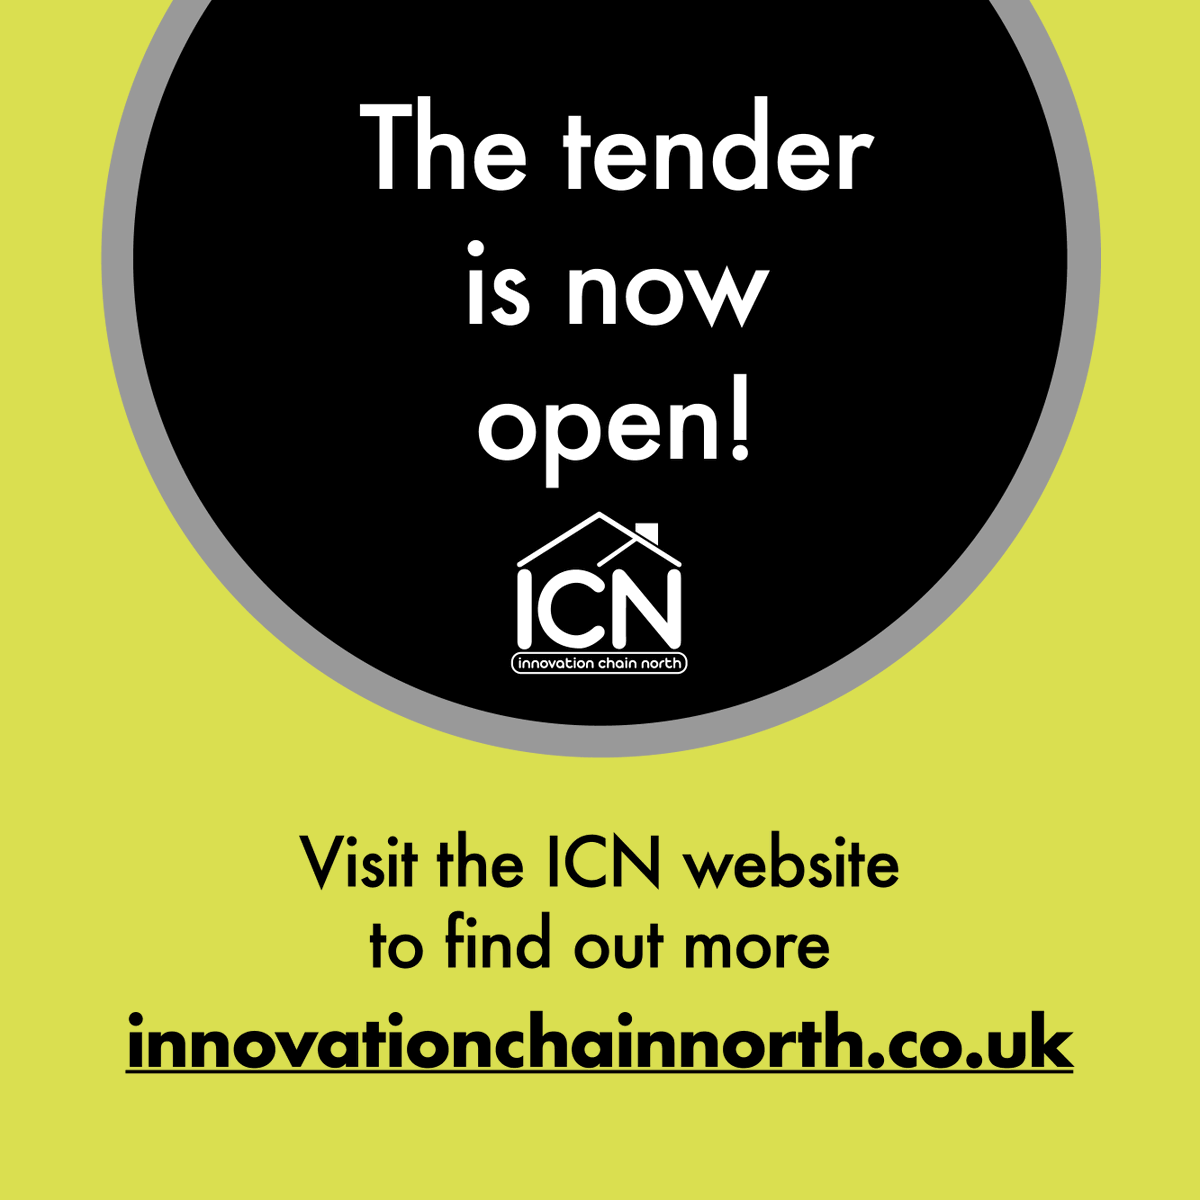 Exciting news, the £1.5b Innovation Chain North tender has now launched. You can find out more and get all the details here - innovationchainnorth.co.uk/news/the-oppor… #Procurement #AffordableHousing #Suppliers #Consultants #Opportunities